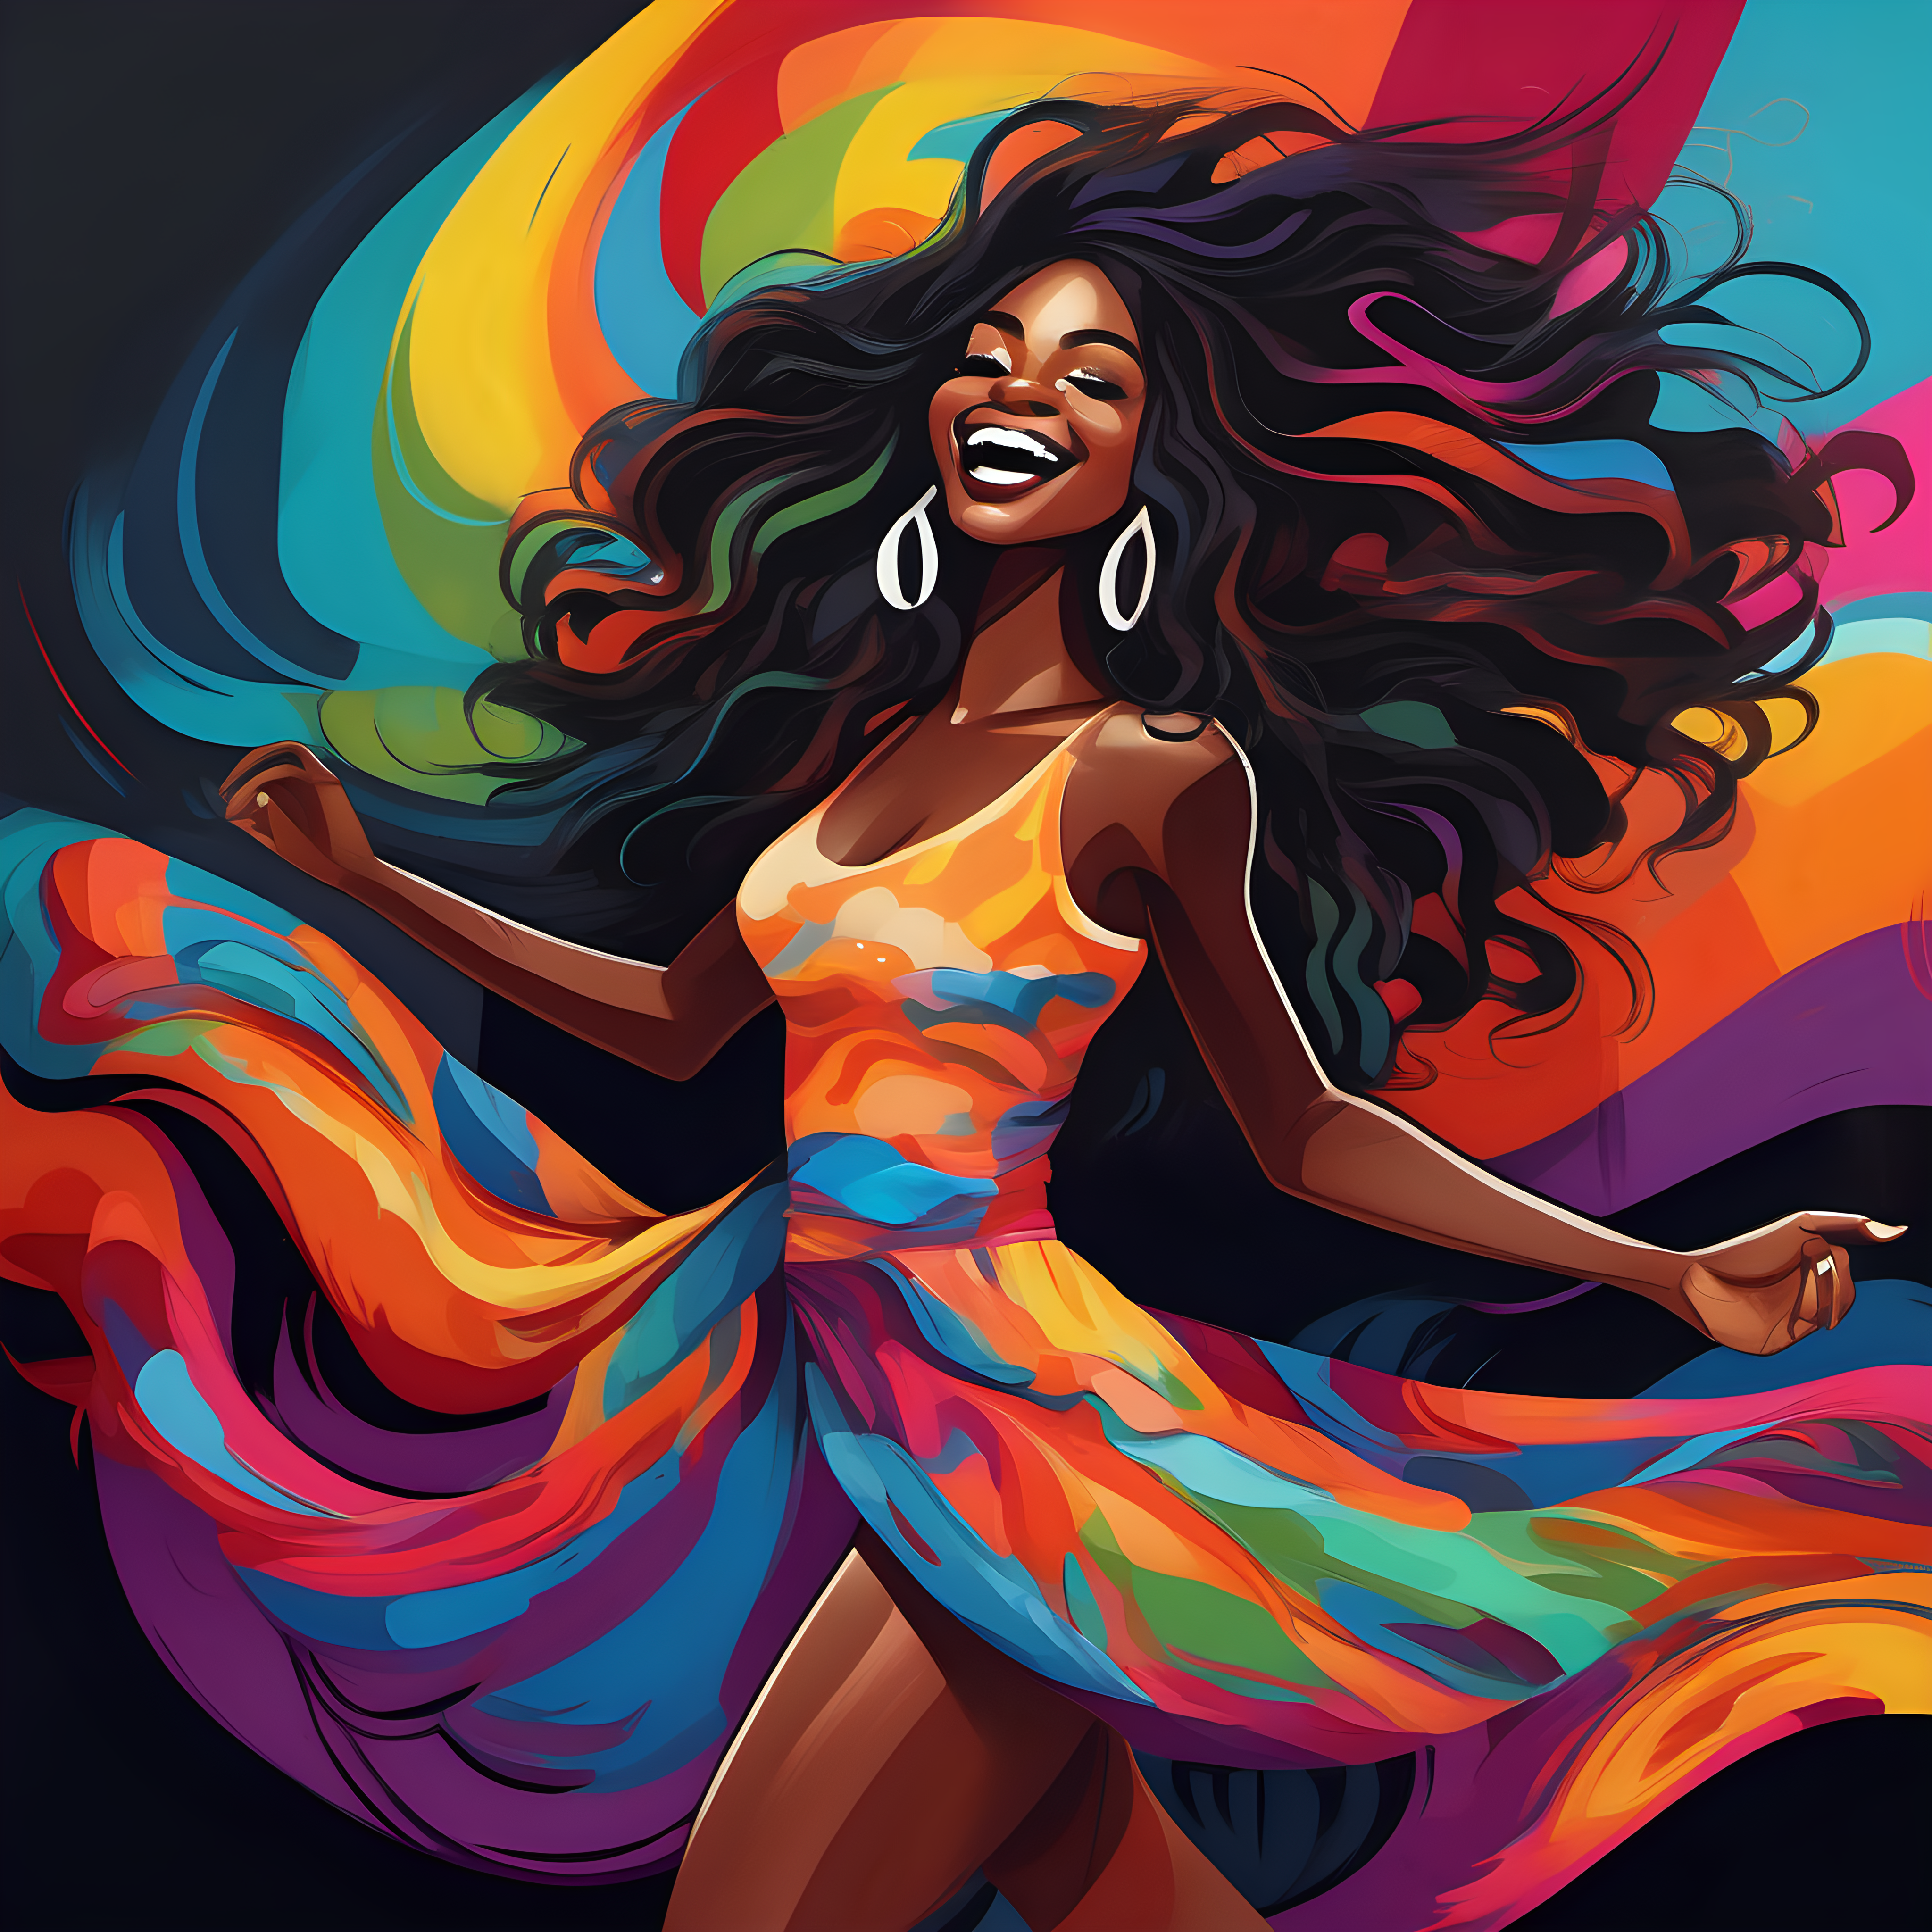 A dark skin black woman in colorful flowing clothes dancing with long beautiful cascading hair, full lips in a sexy smile in mural art style